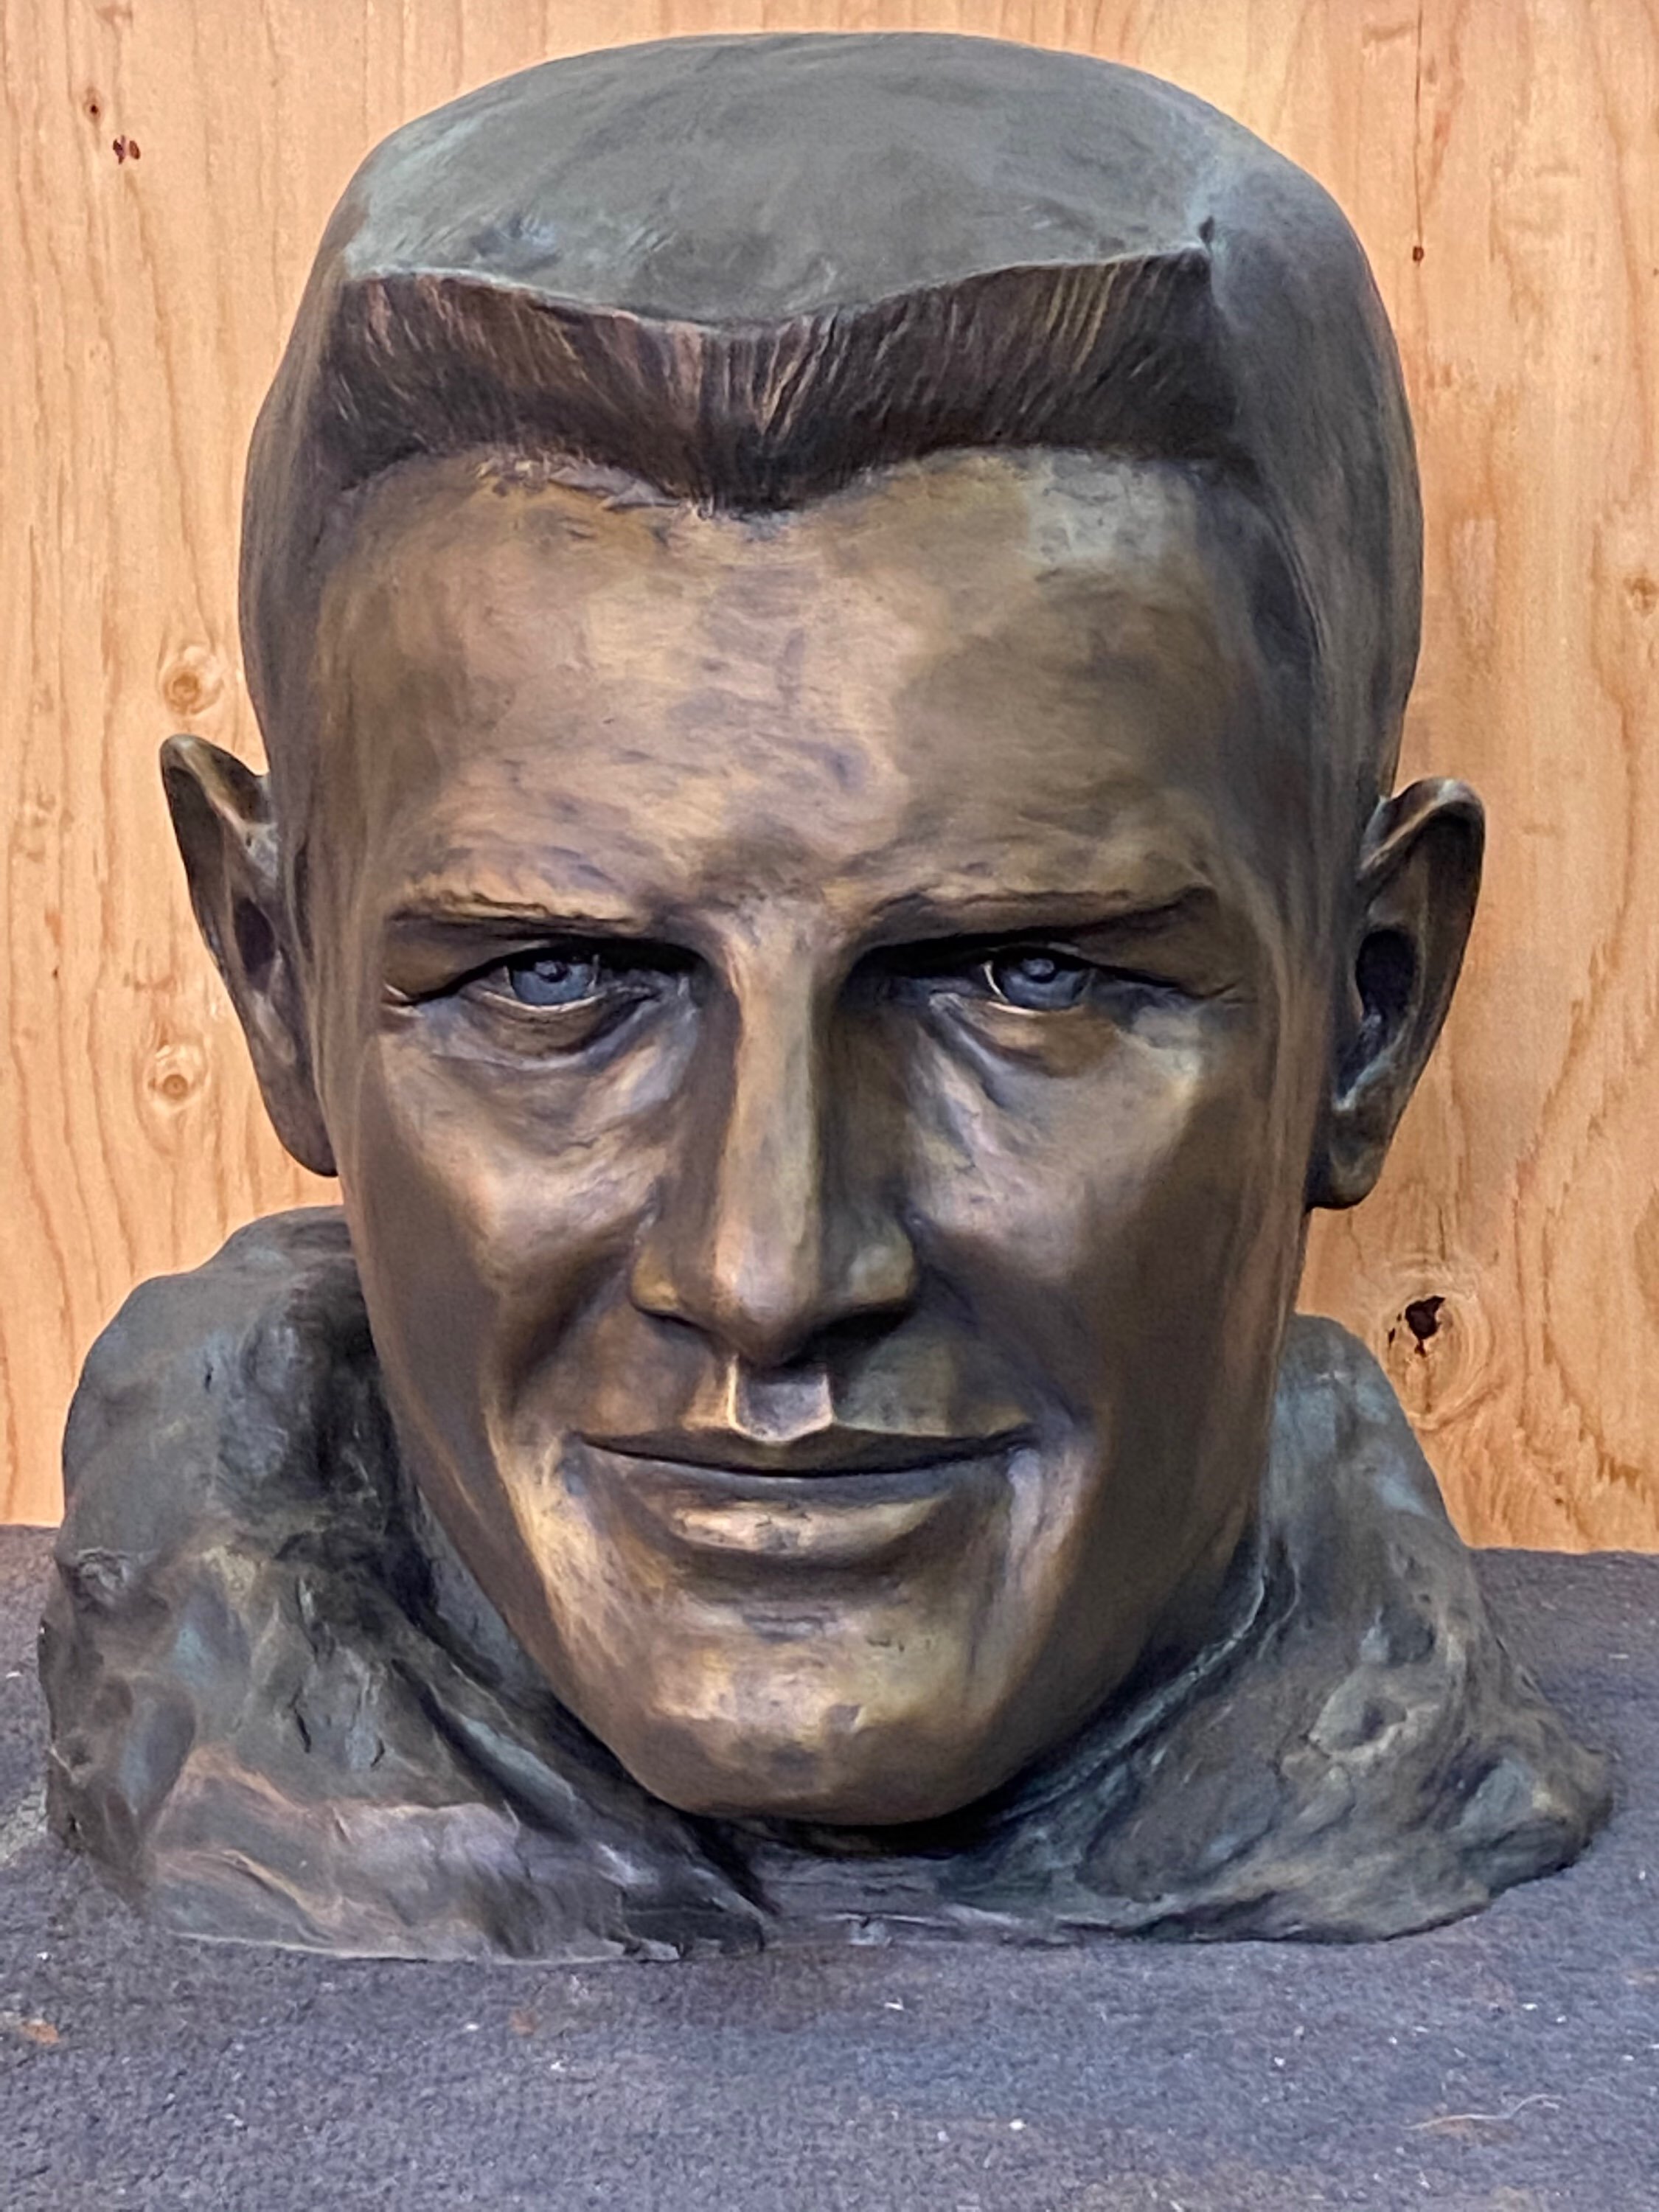 Duke's Bronze to be displayed in the South End zone sometime in 2021